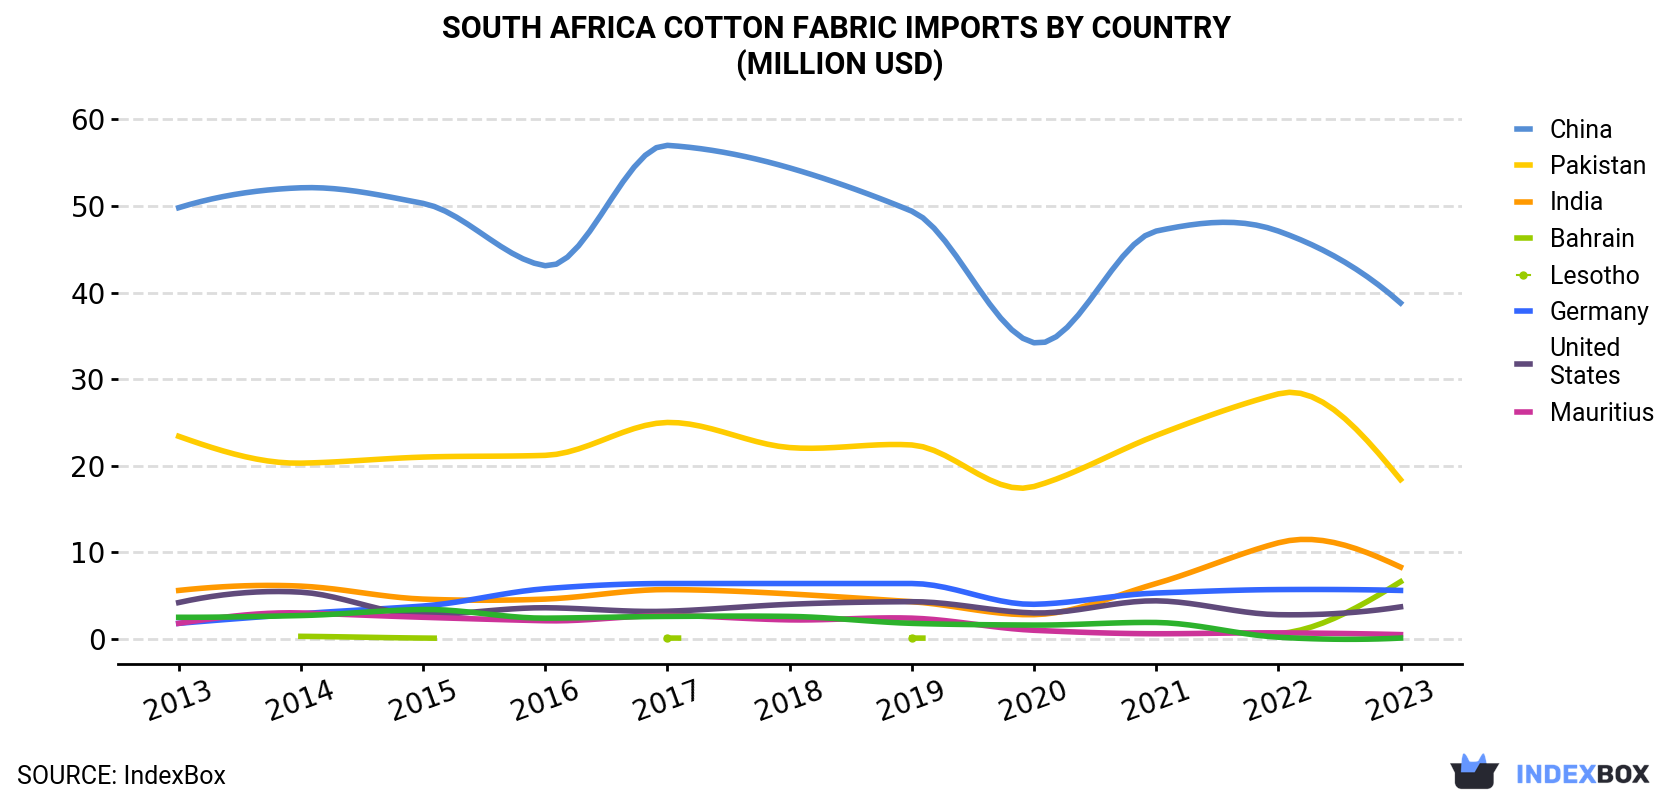 South Africa Cotton Fabric Imports By Country (Million USD)